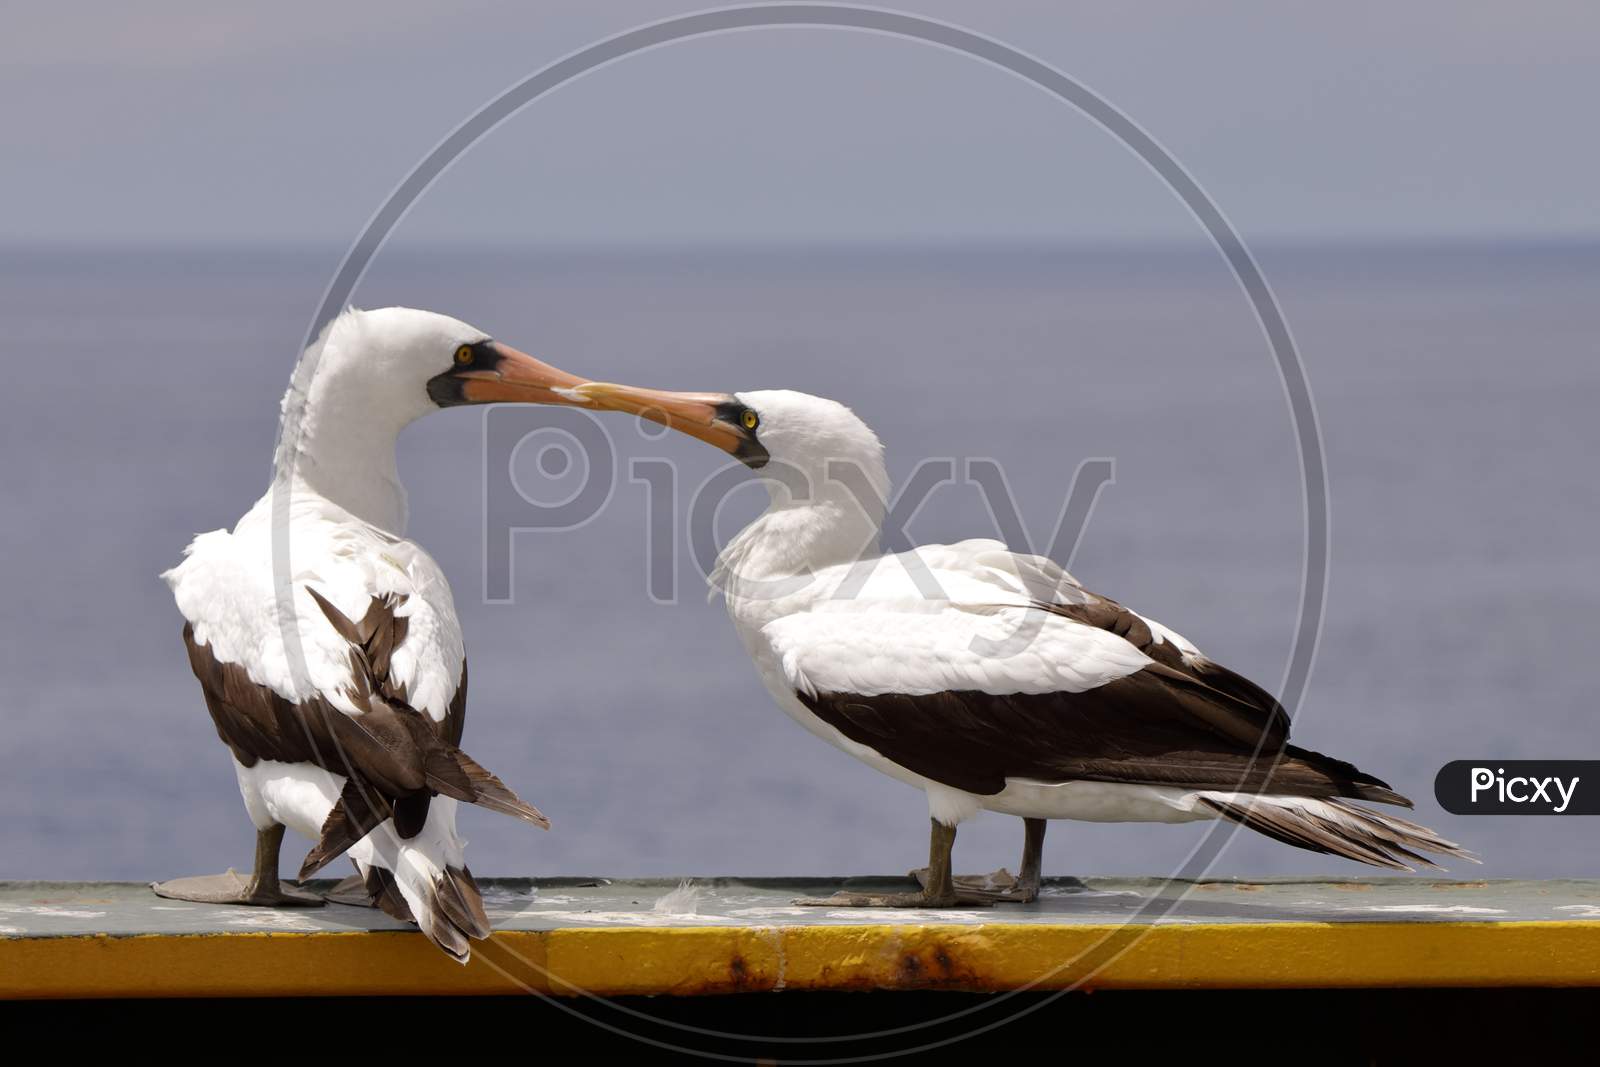 Masking Booby Love of sharing